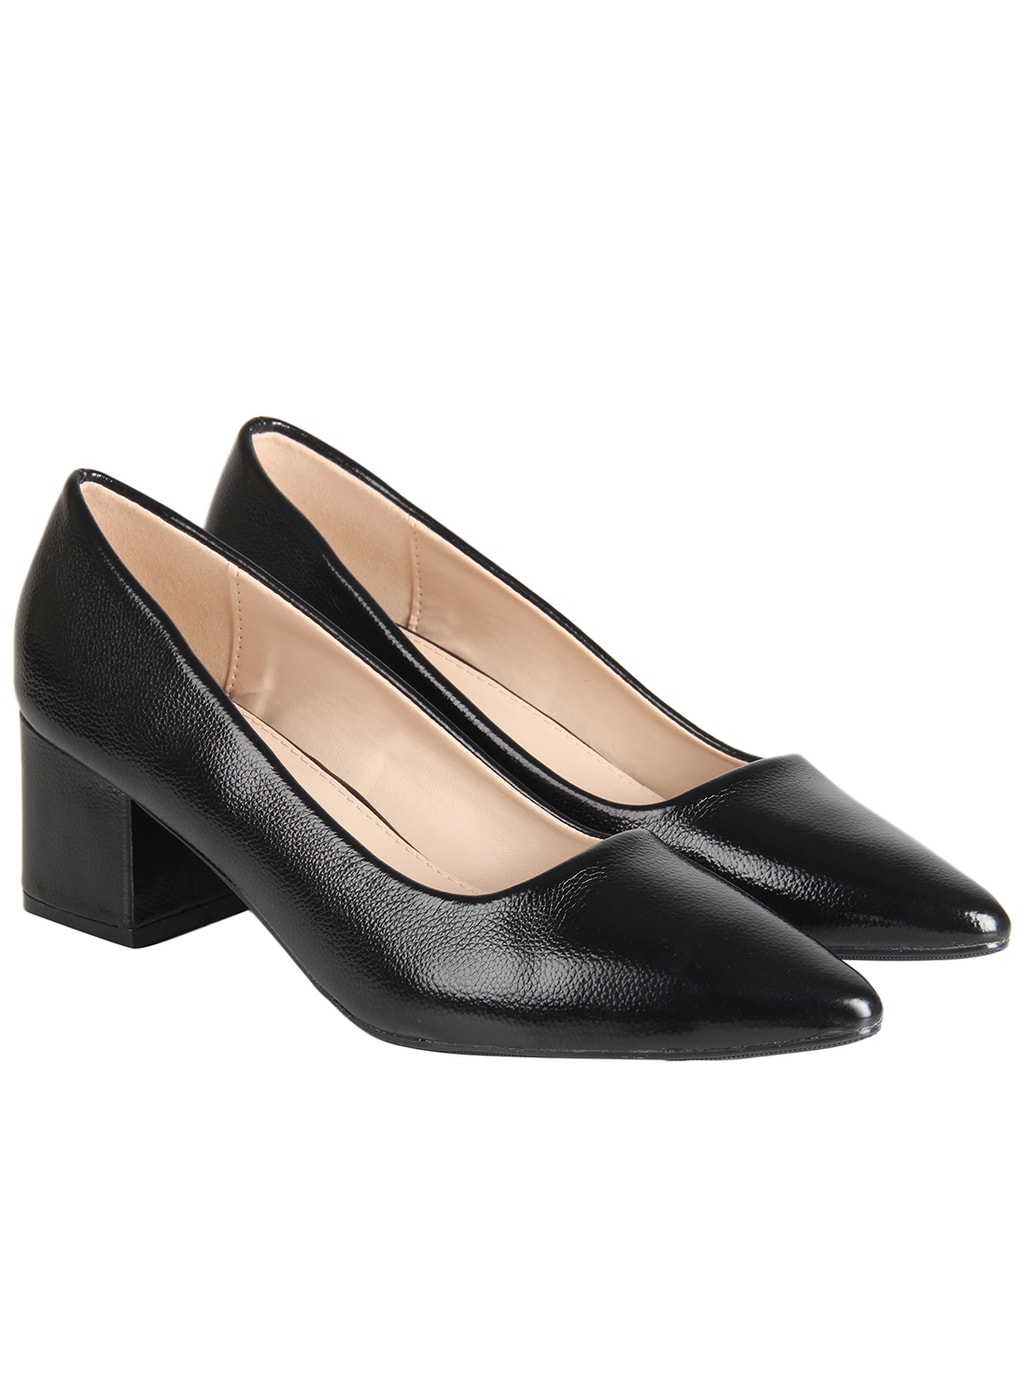 Heeled Shoes for Women by Flat n Heels 